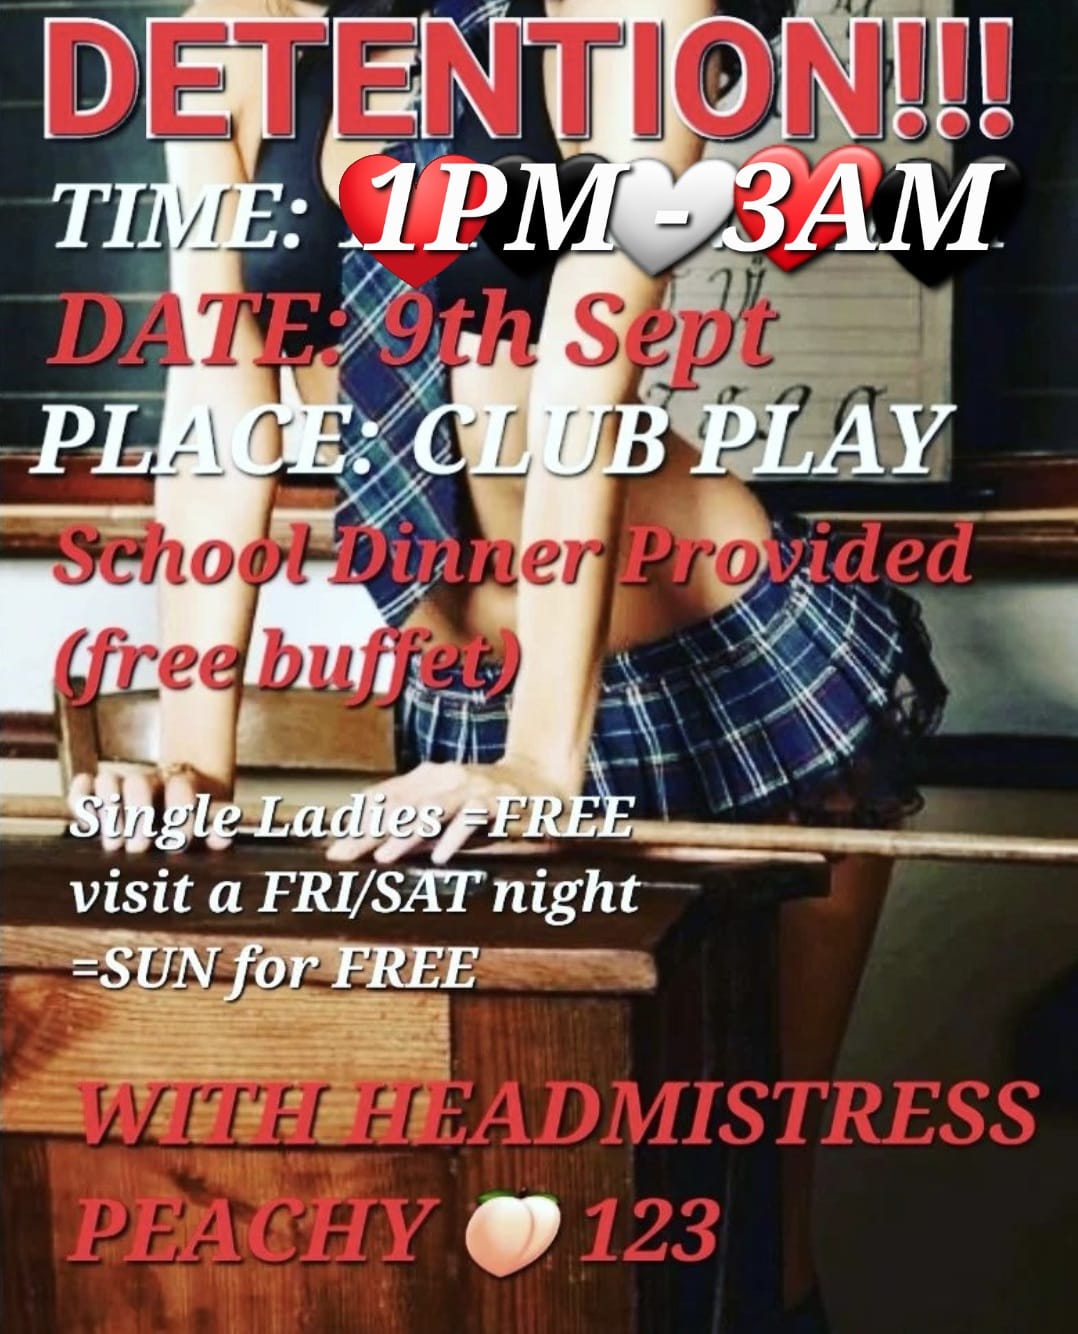 DETENTION ! - (50 shades of PLAY) - Sat 9th Sept- CLUB PLAY - 1pm - 3am(including free buffet)